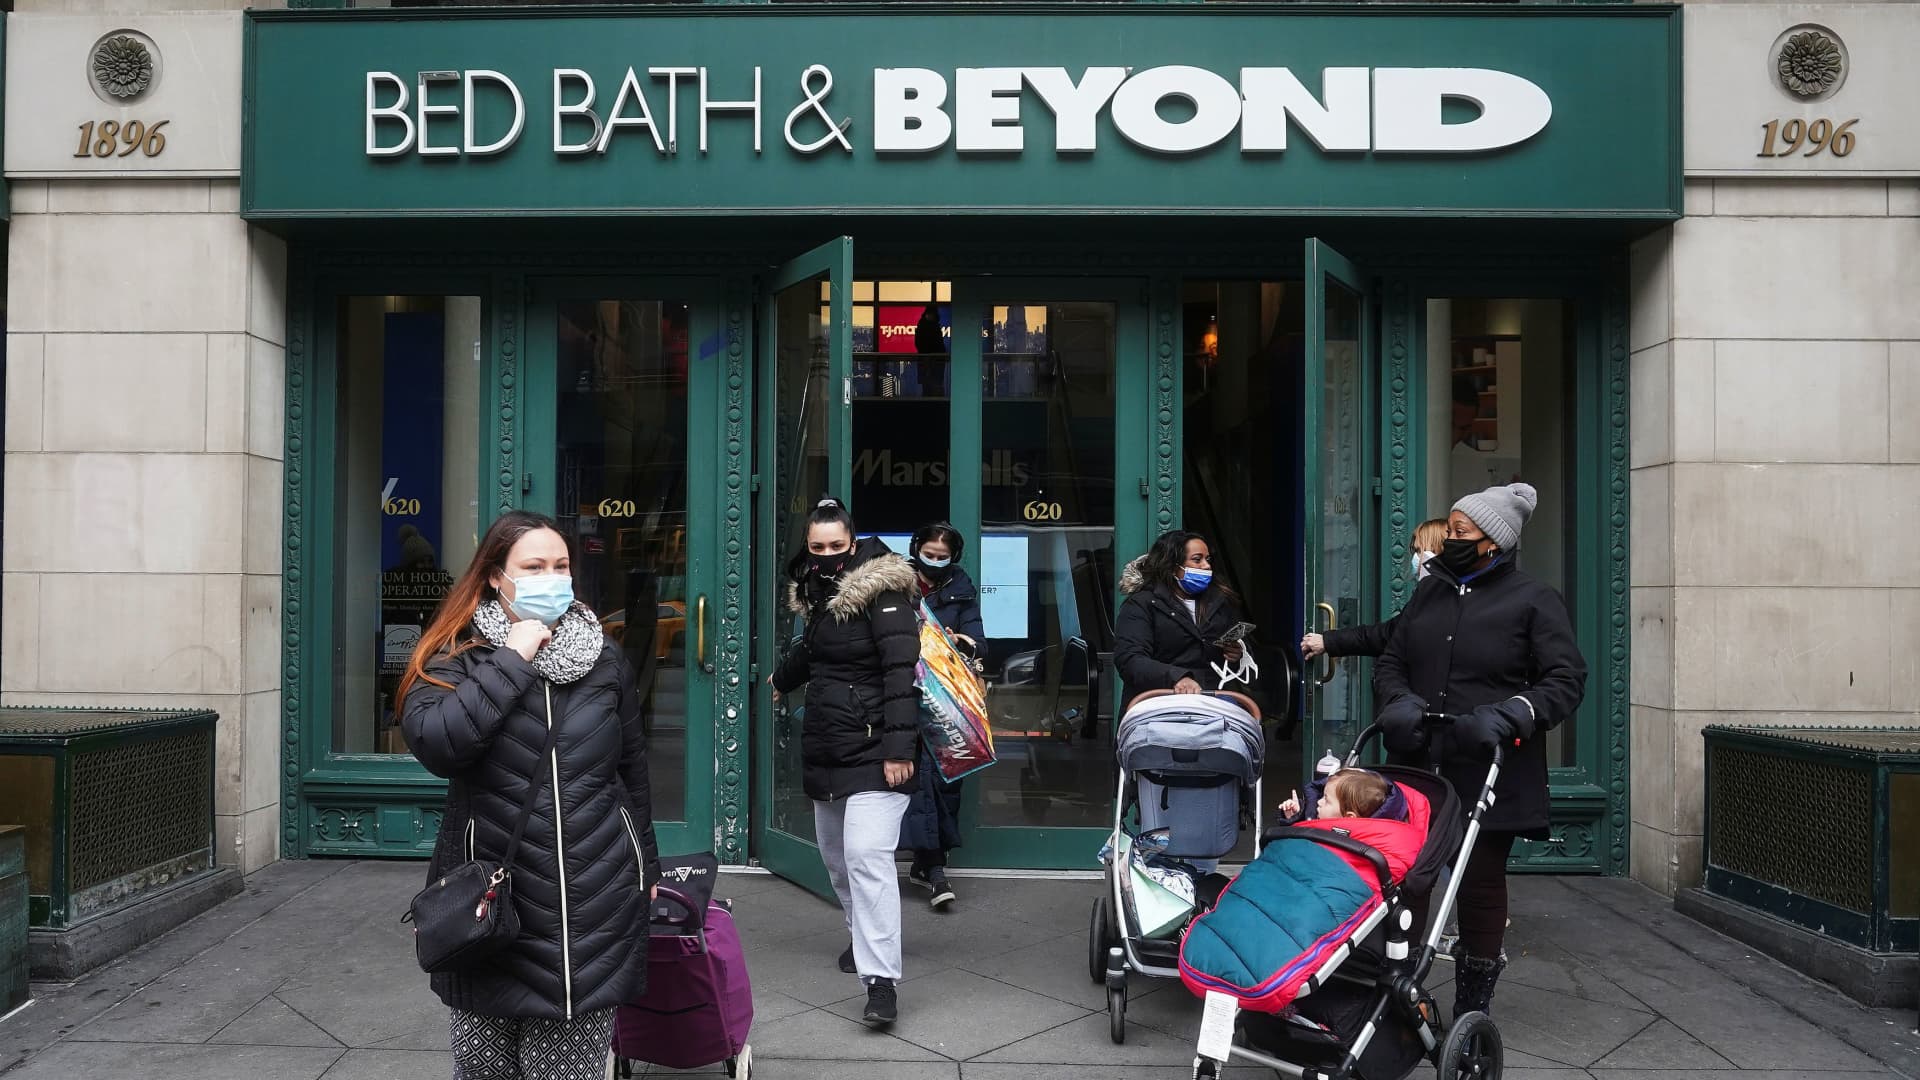 Bed Bath & Beyond's turnaround is not enough to fix the struggling business, analysts say